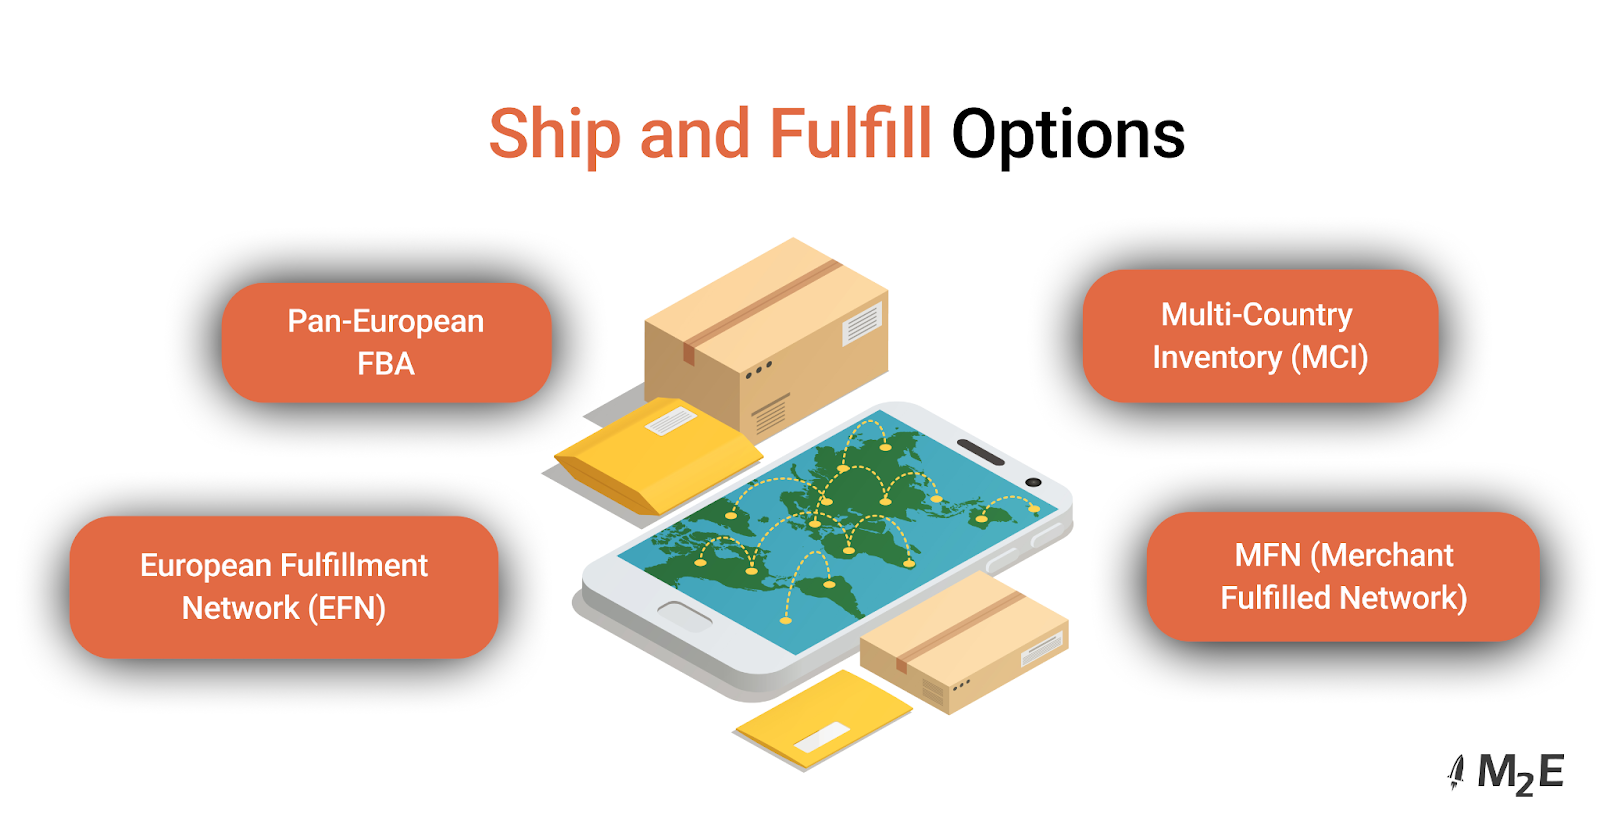 Ship and Fulfill Options